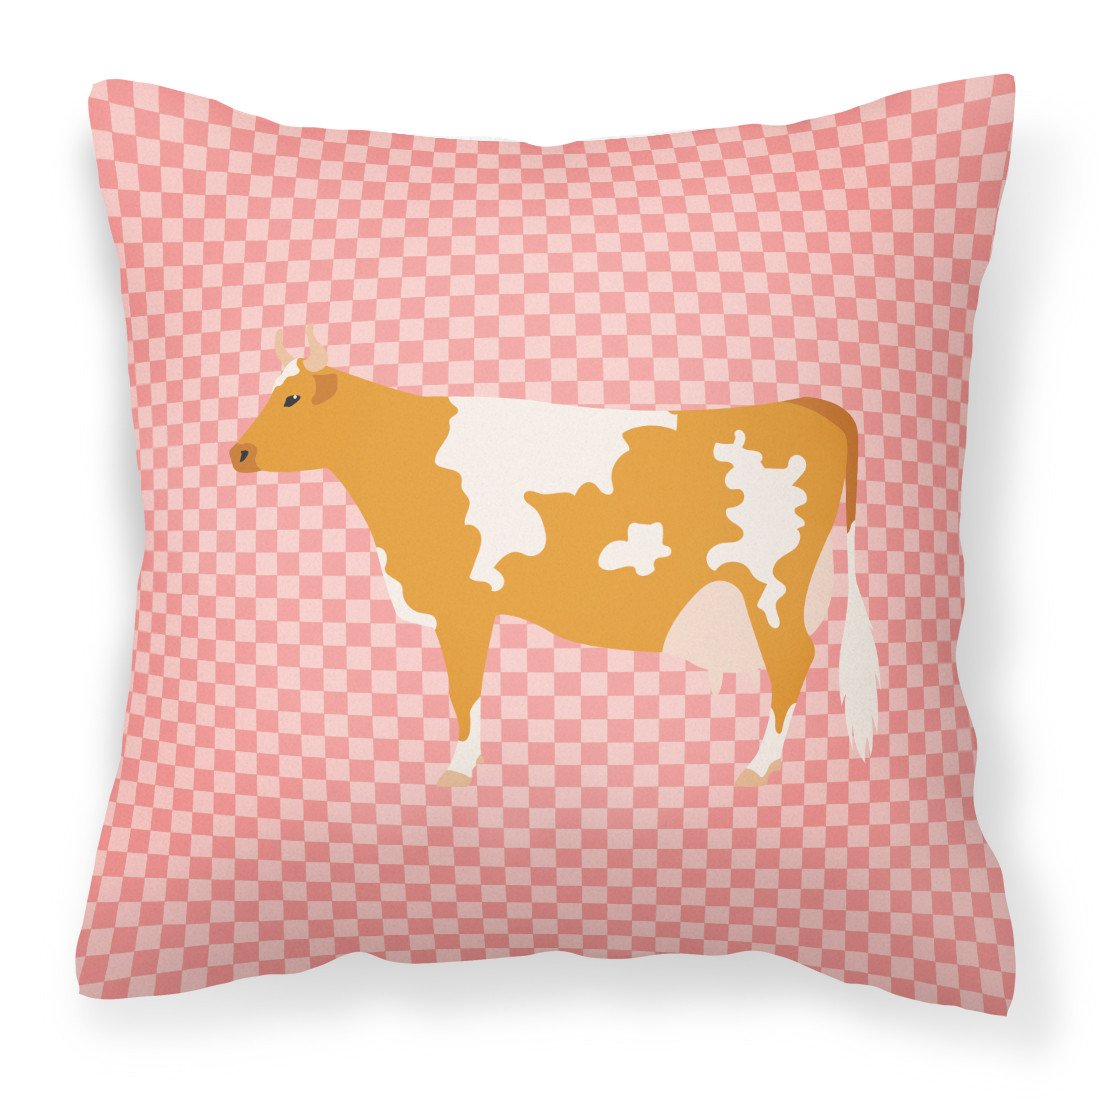 Guernsey Cow Pink Check Fabric Decorative Pillow BB7821PW1818 by Caroline's Treasures